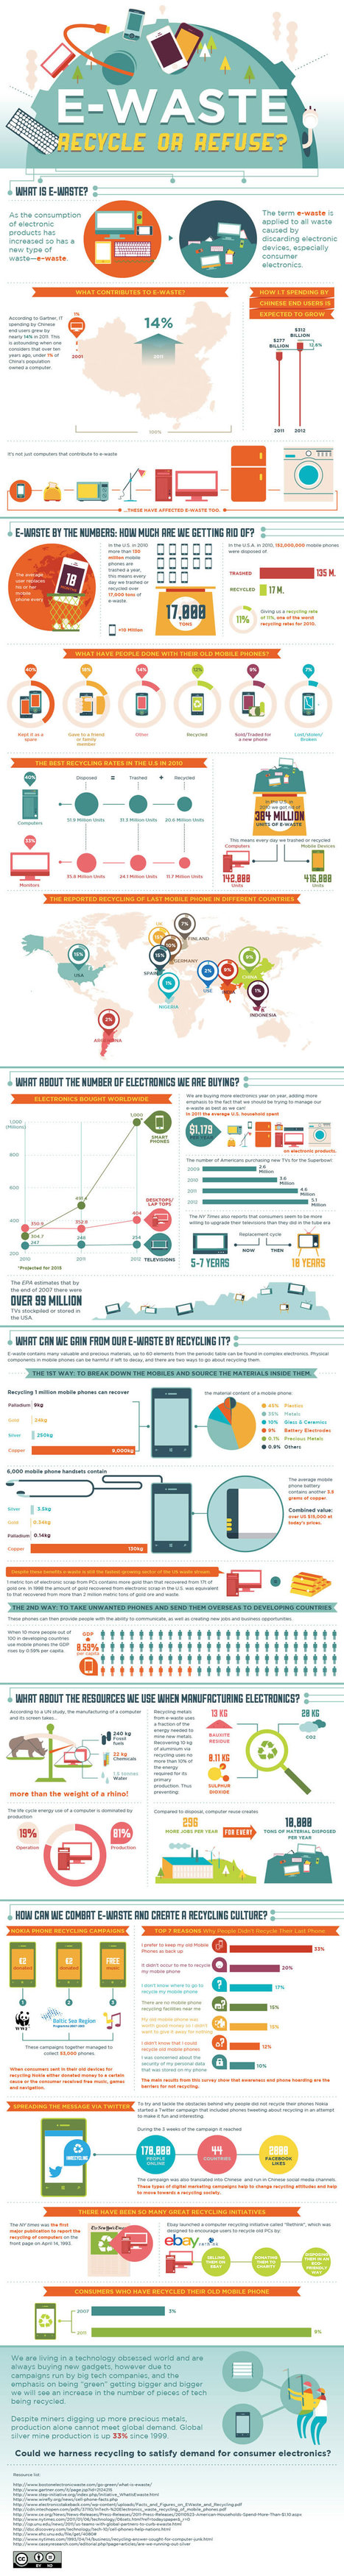 E-Waste by the Numbers: Infographic | WEBOLUTION! | Scoop.it